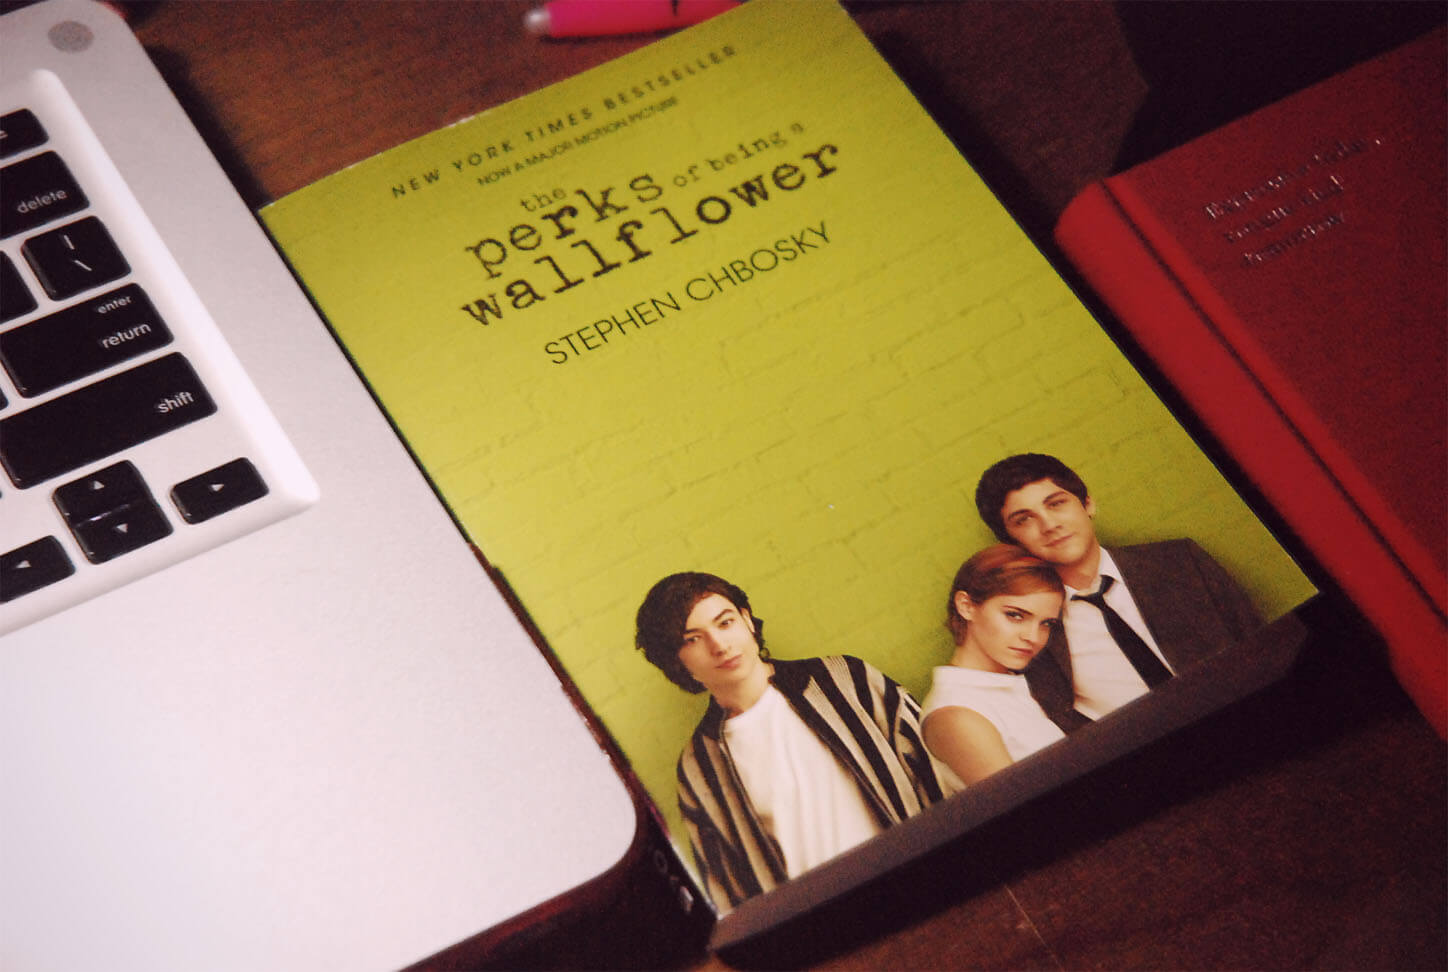 Teen here. The Perks of being a Wallflower by Stephen Chbosky.